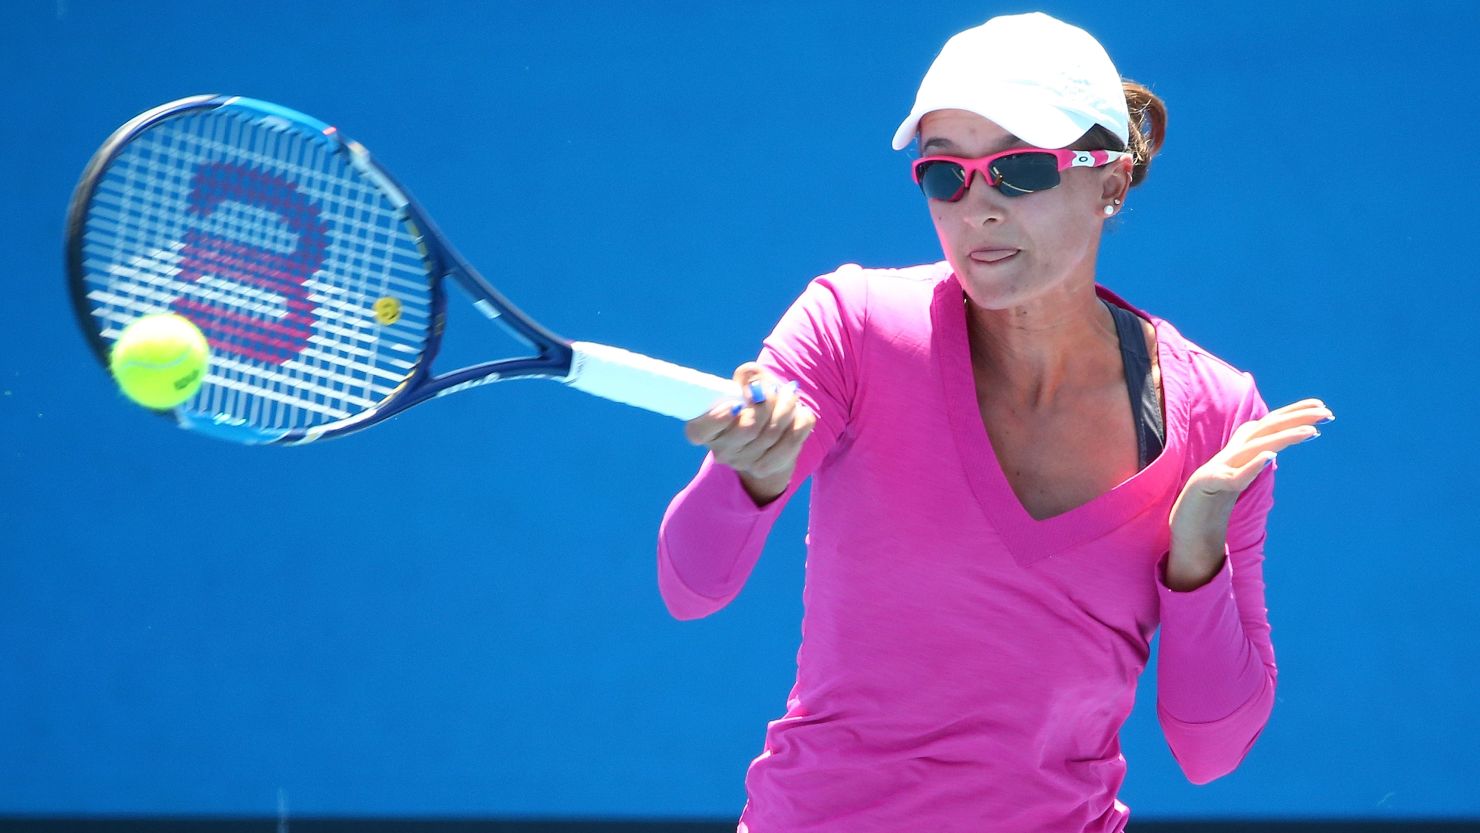 The busiest bride of all time? Saturday will be action-packed for Arina Rodionova.